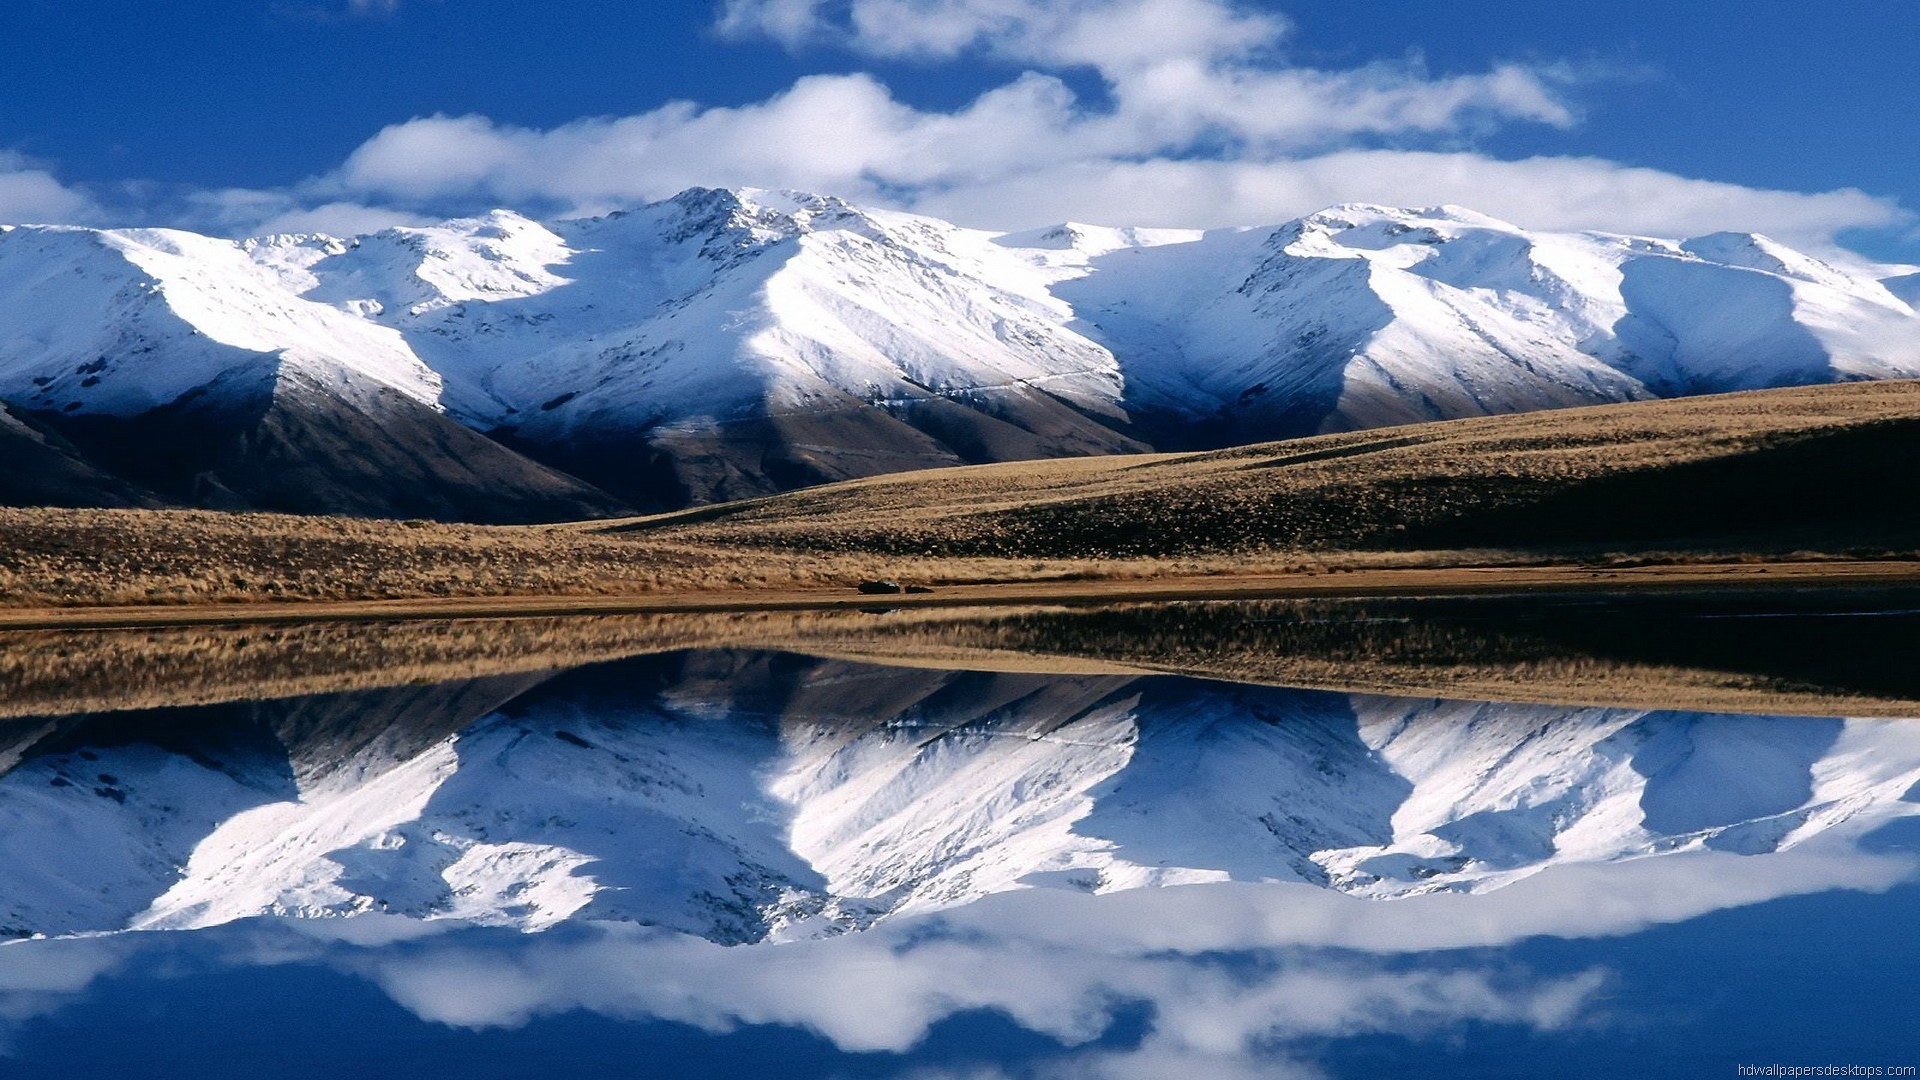 General 1920x1080 nature landscape New Zealand mountains clouds hills water lake reflection snow